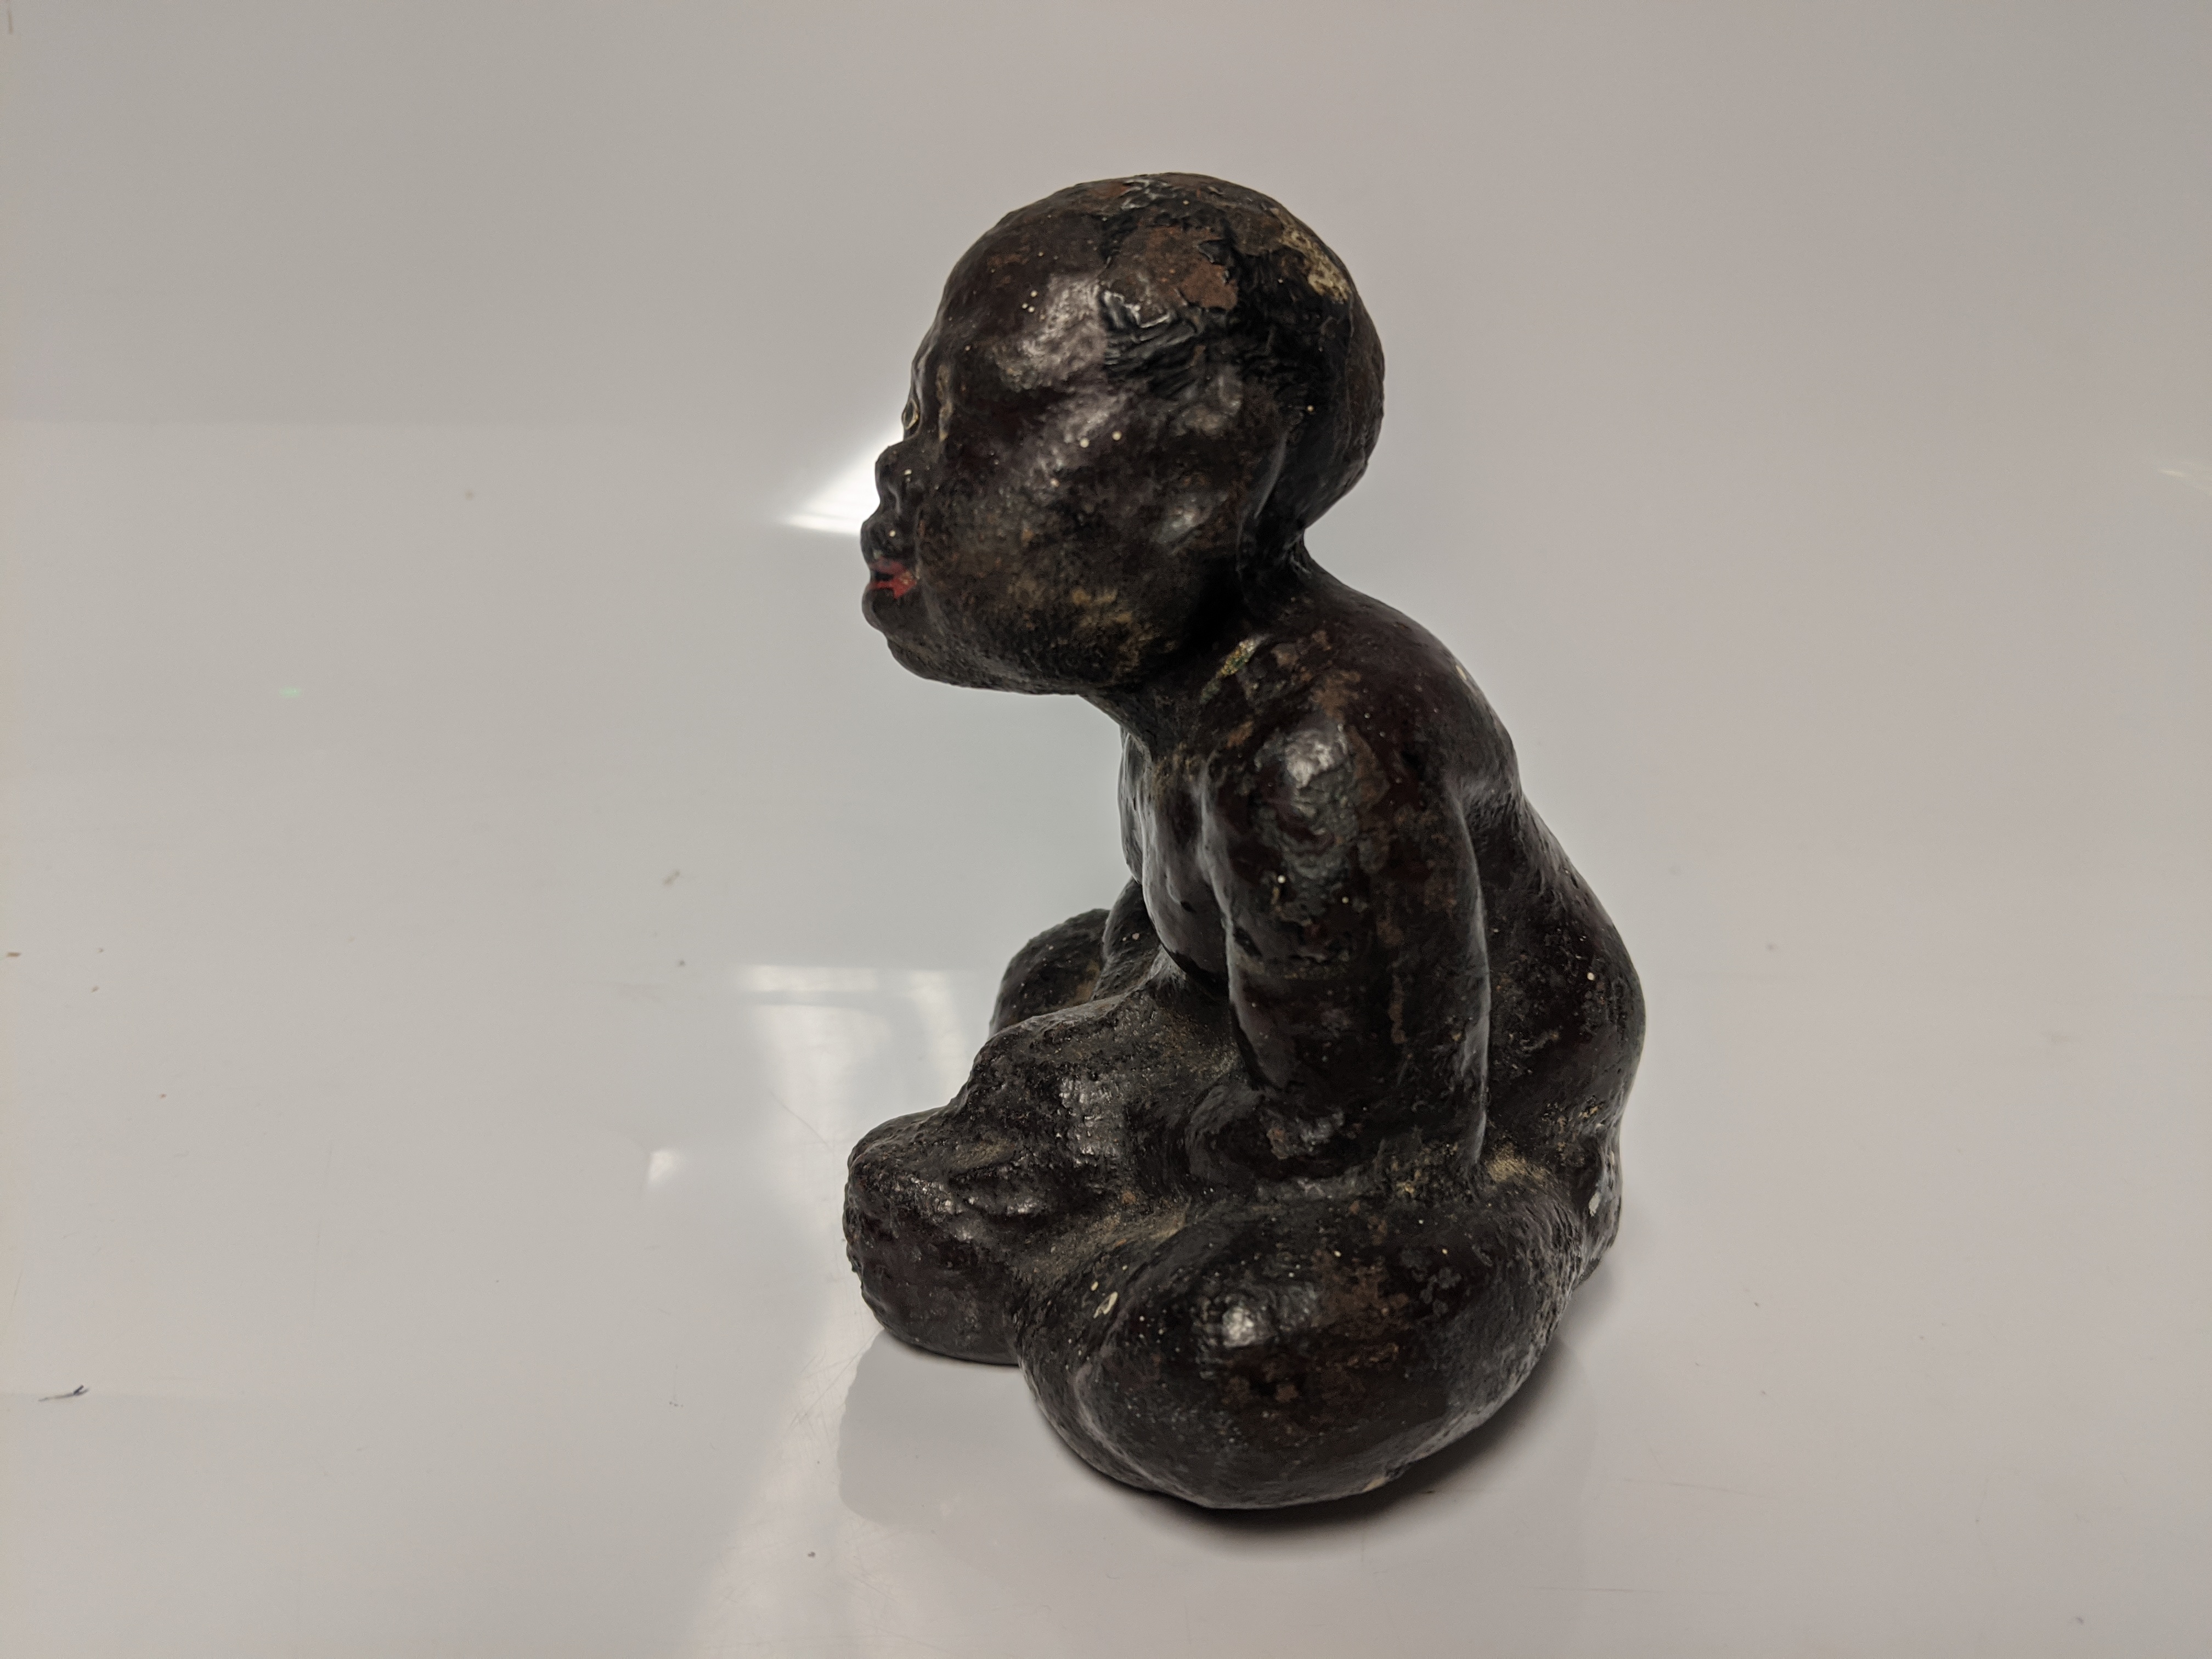 An early 20th century cast iron Black Americana paperweight / figurine of a seated male figure being - Image 4 of 5